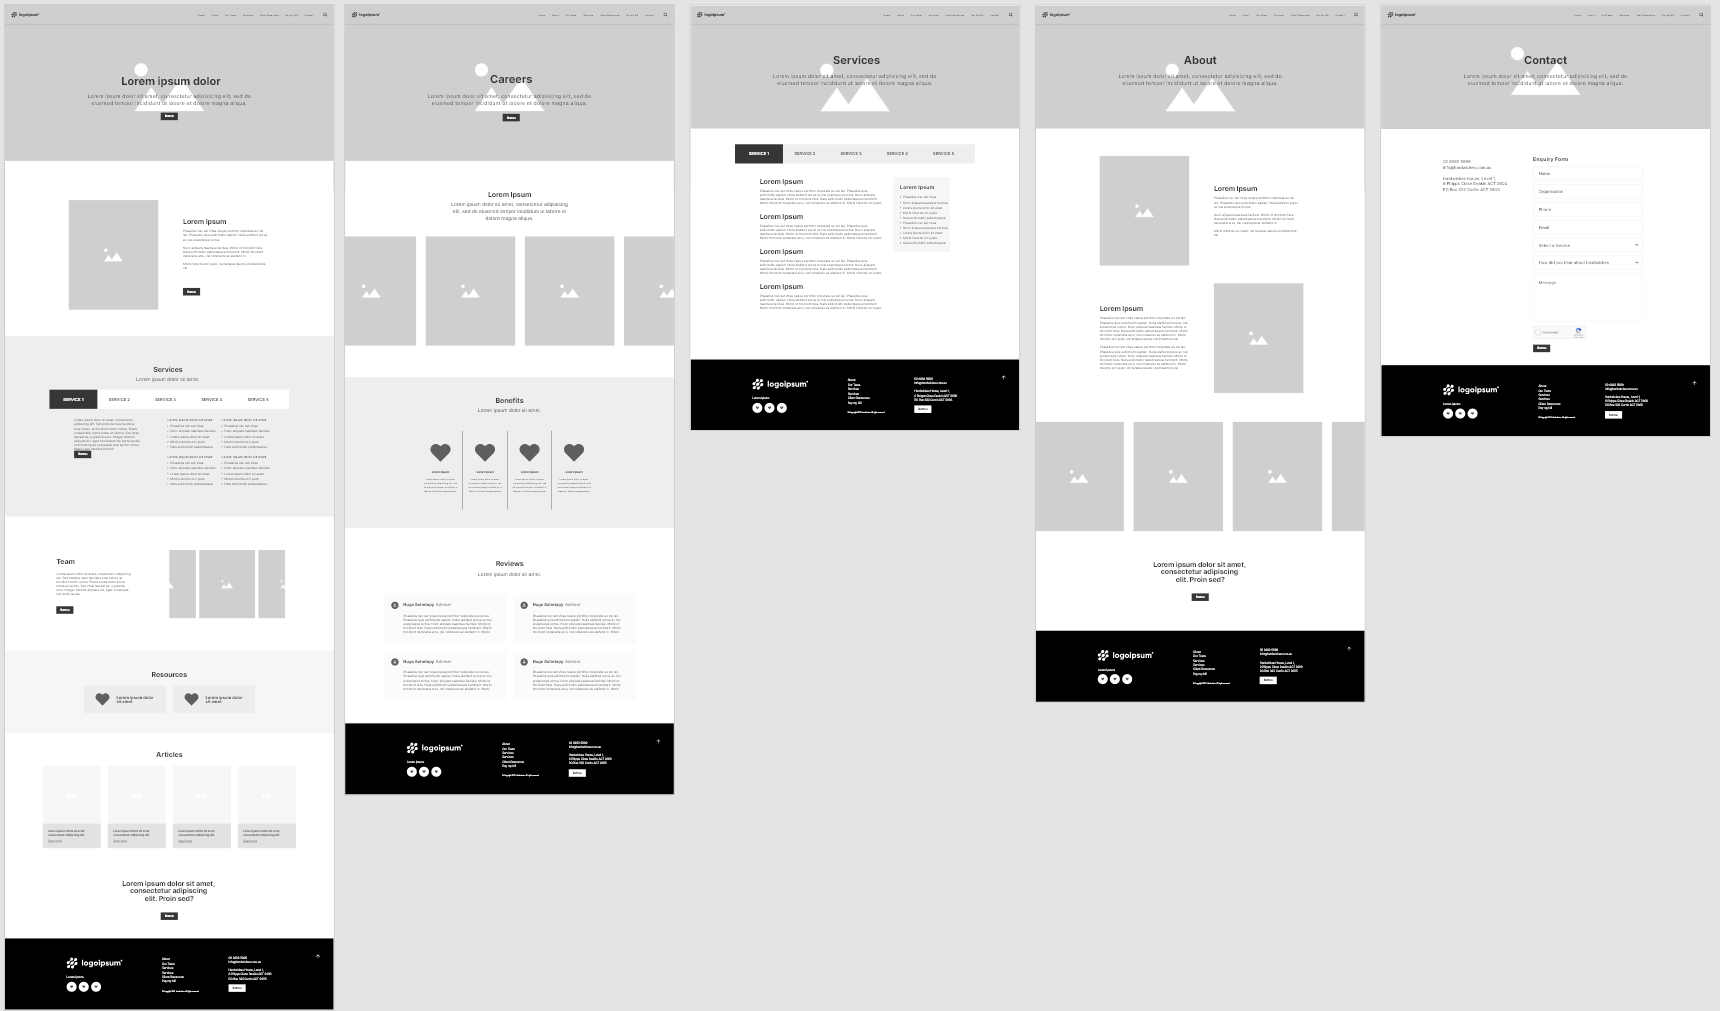 Example of a wireframe on Adobe XD.